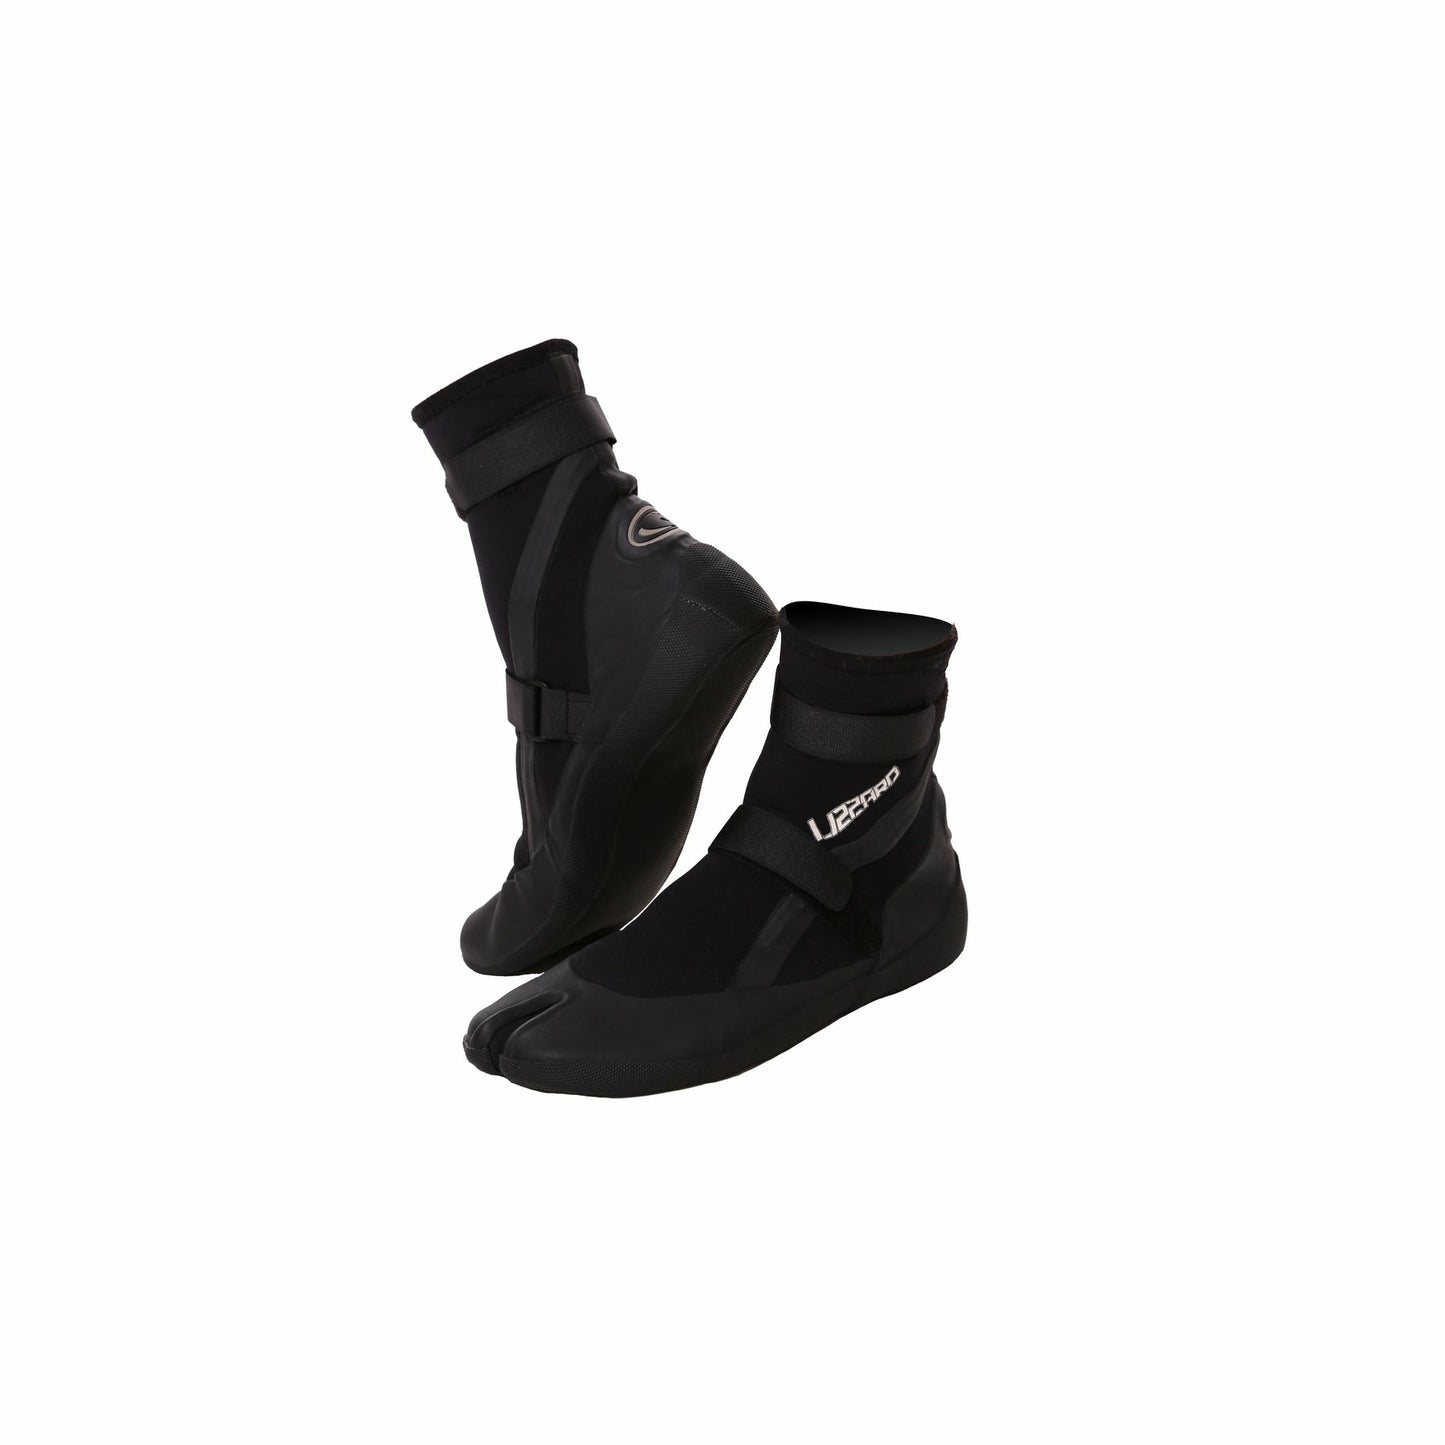 Lizzard - Men's High-Ankle Boots